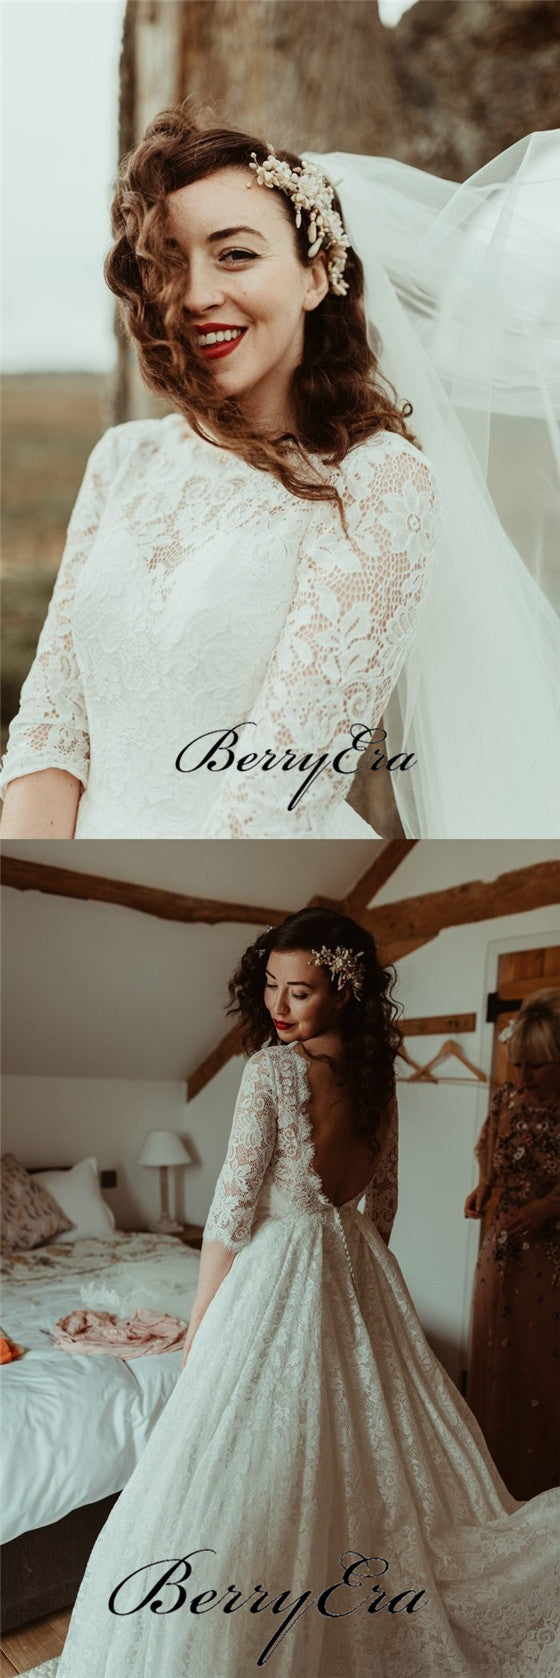 Half Sleeves Lace A-line Wedding Dresses, A-line Wedding Dresses, Bridal Gown